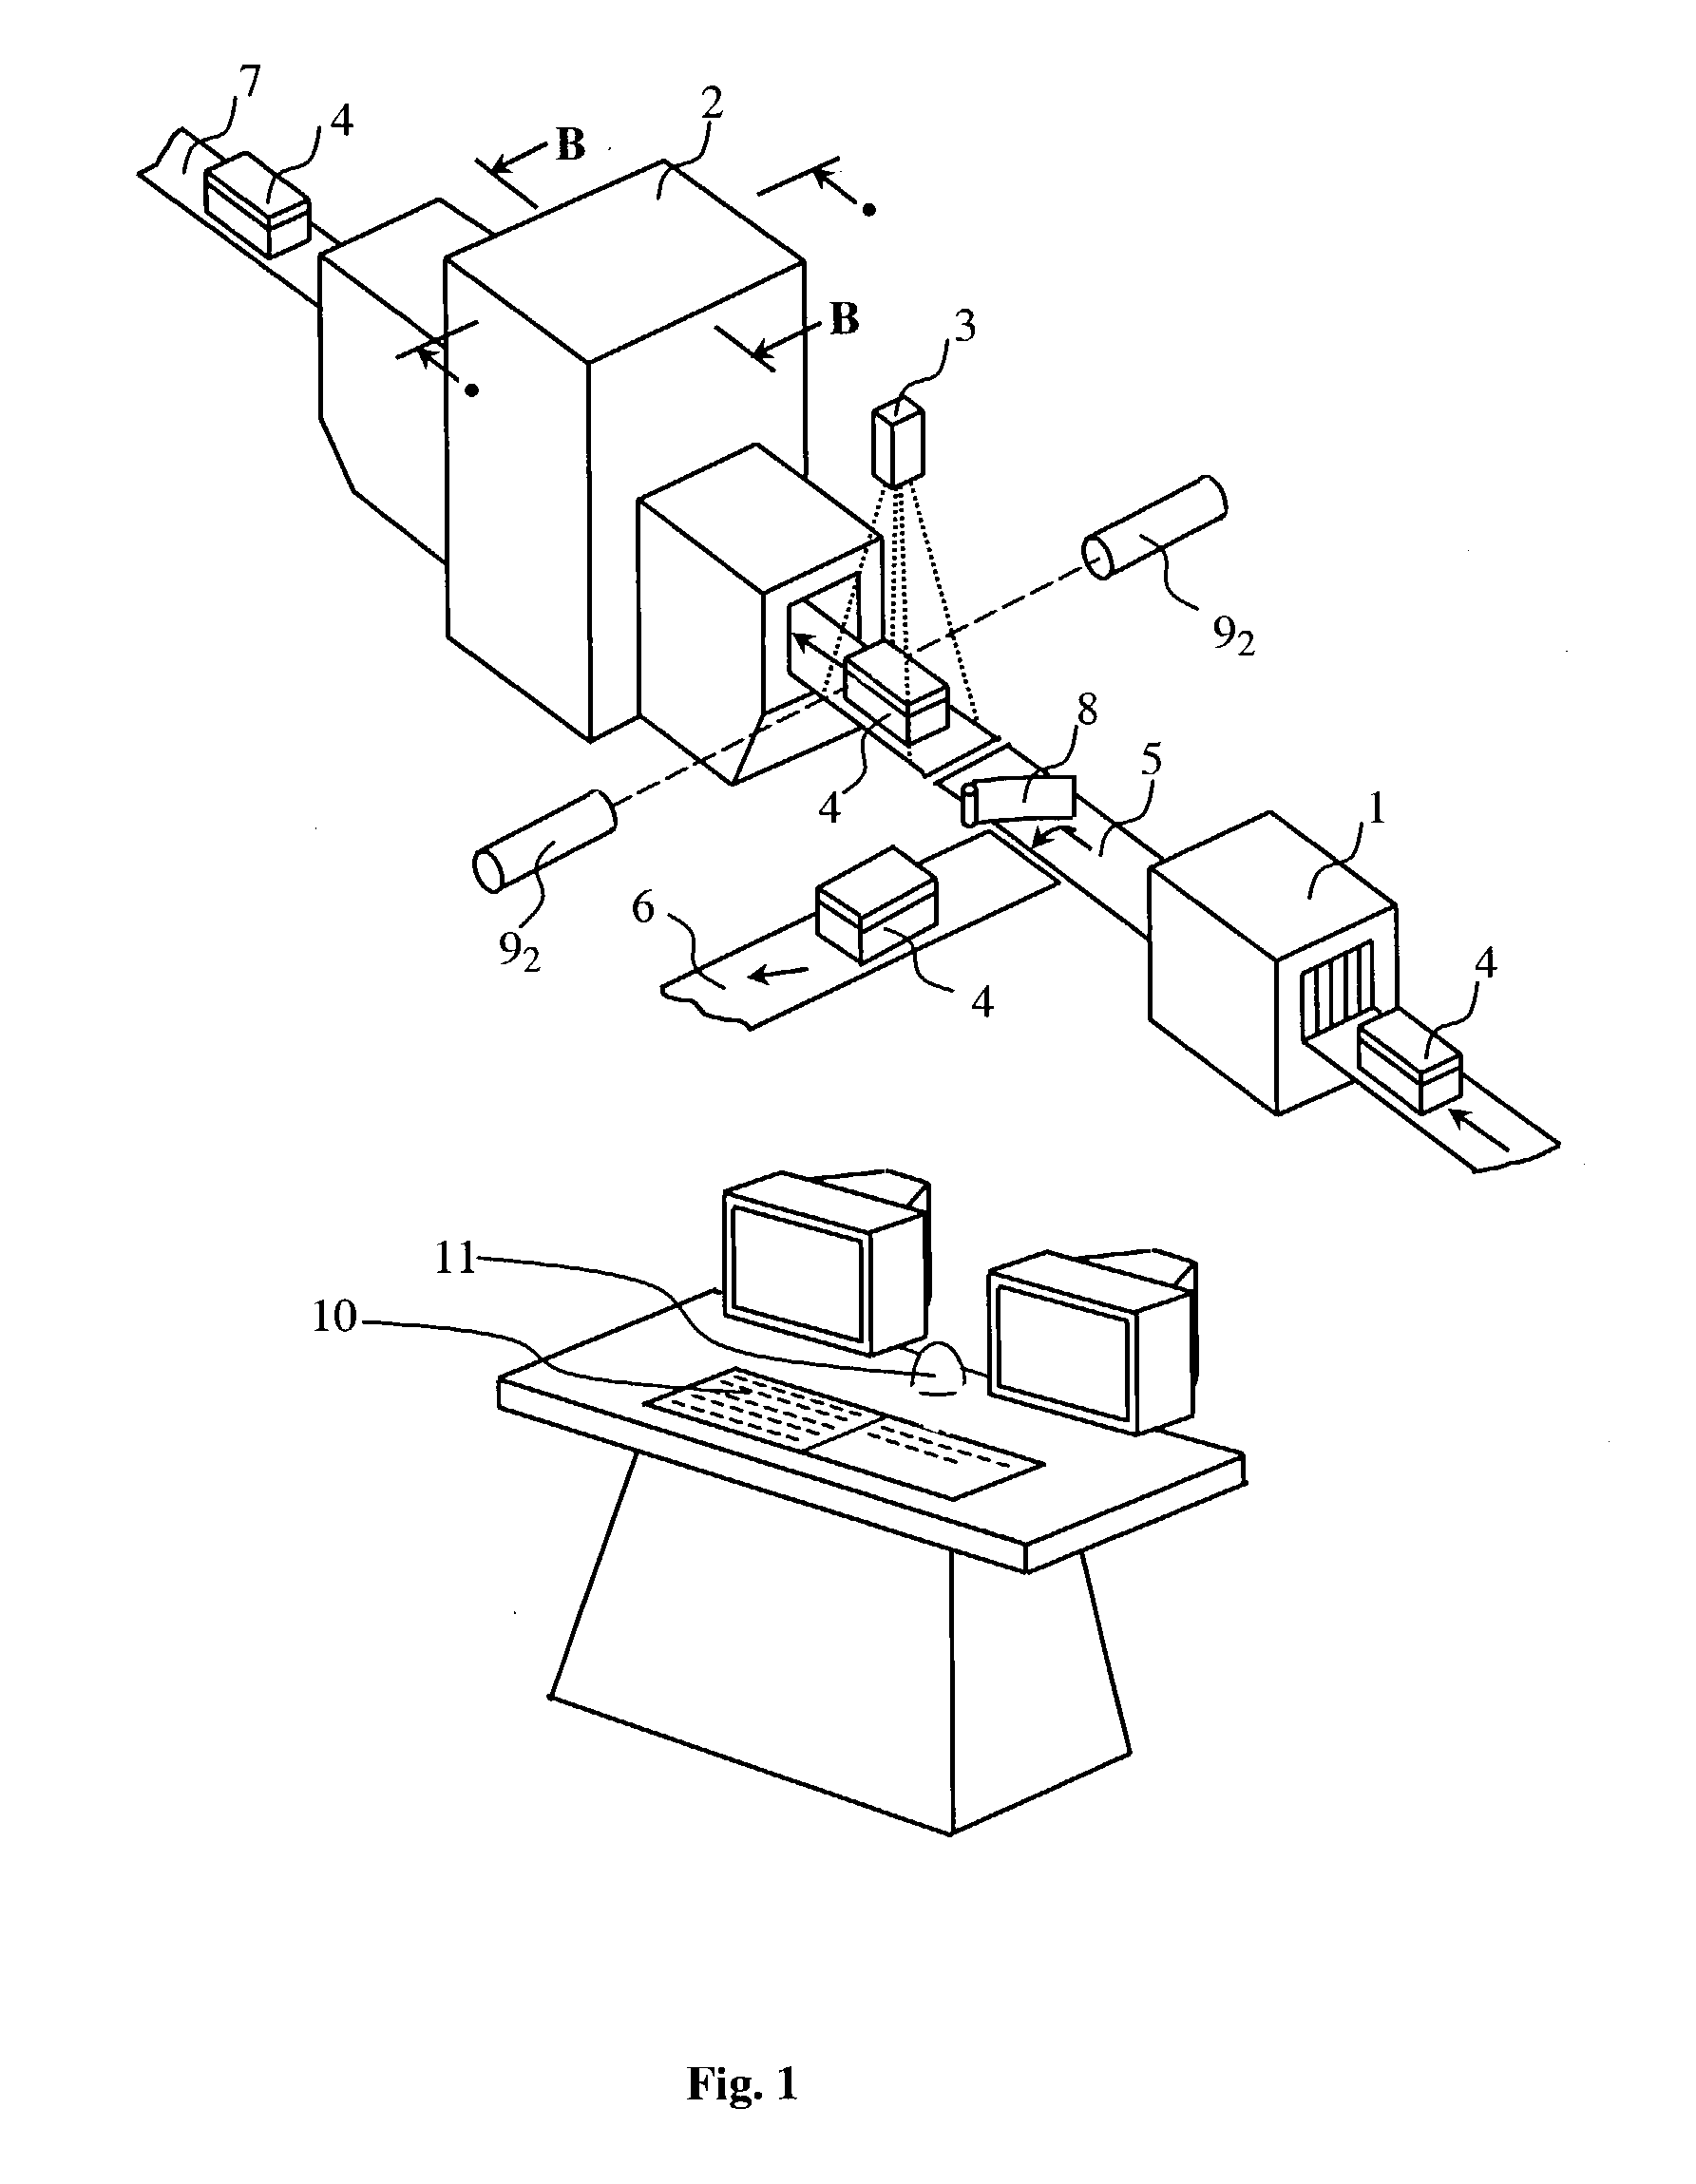 Method for detecting an explosive in an object under investigation